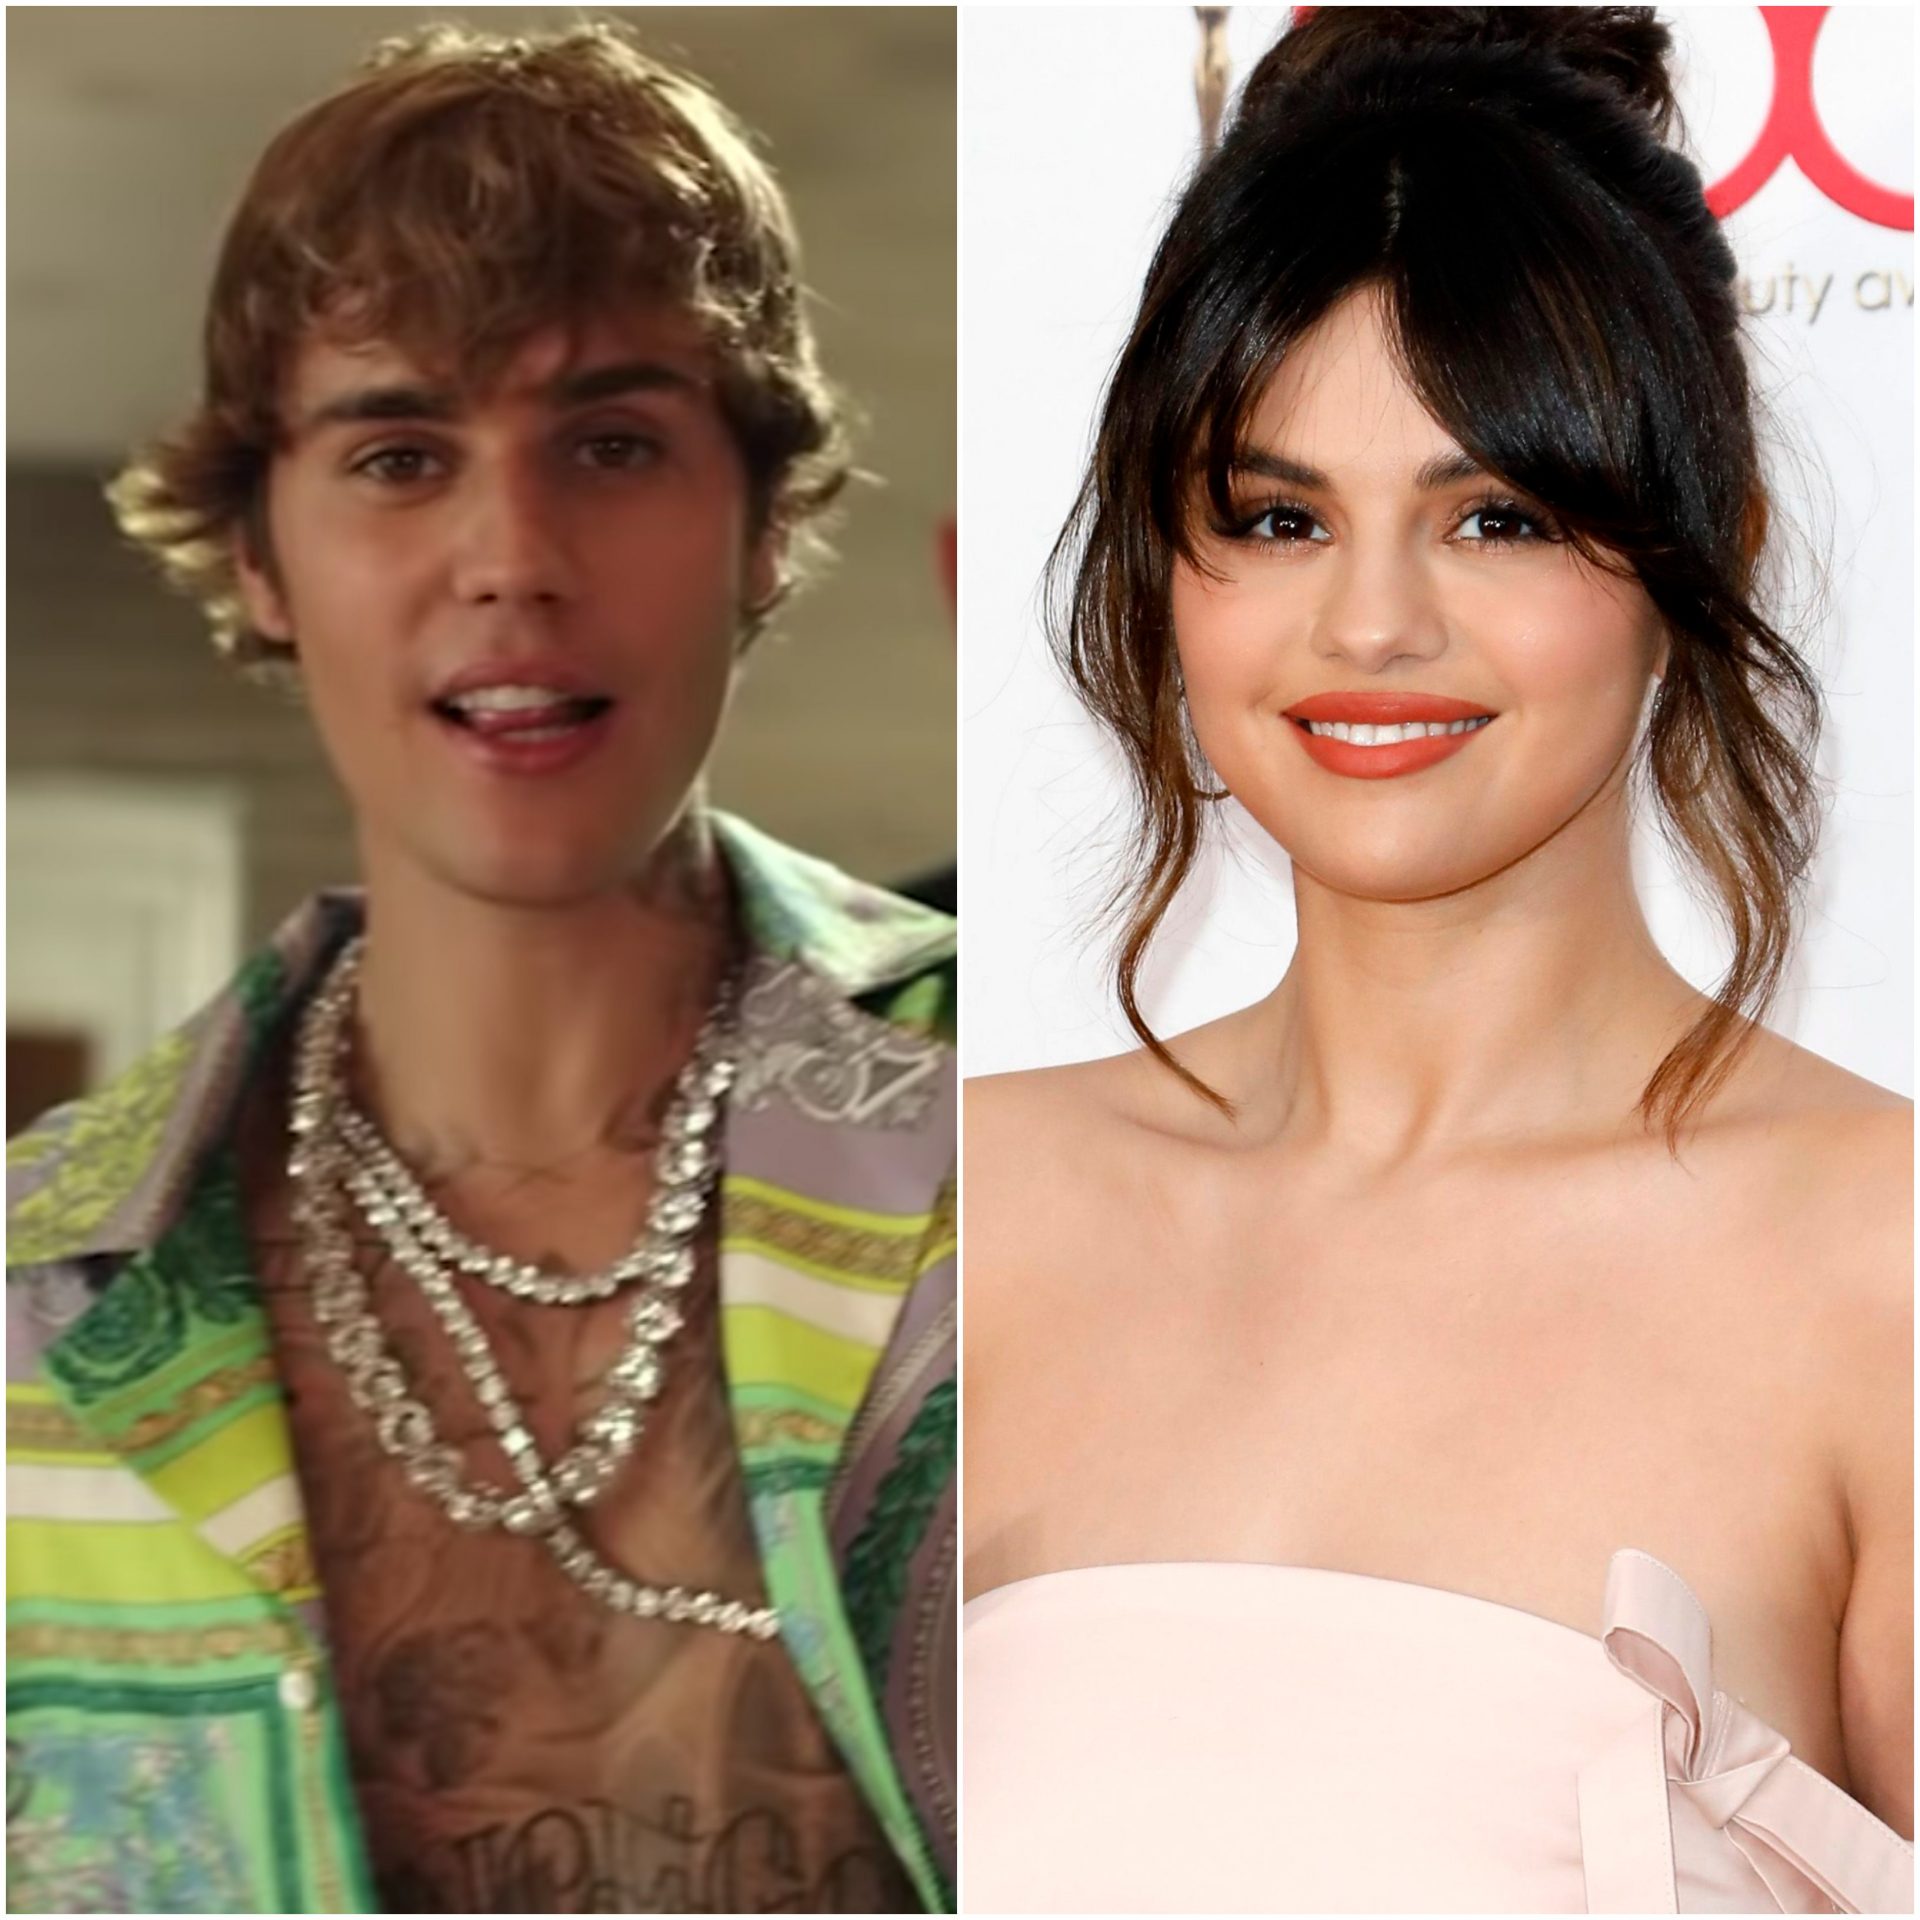 Selena Gomez Fans Are No longer Pleased Justin Bieber Gave Her a Shoutout in ‘Popstar’